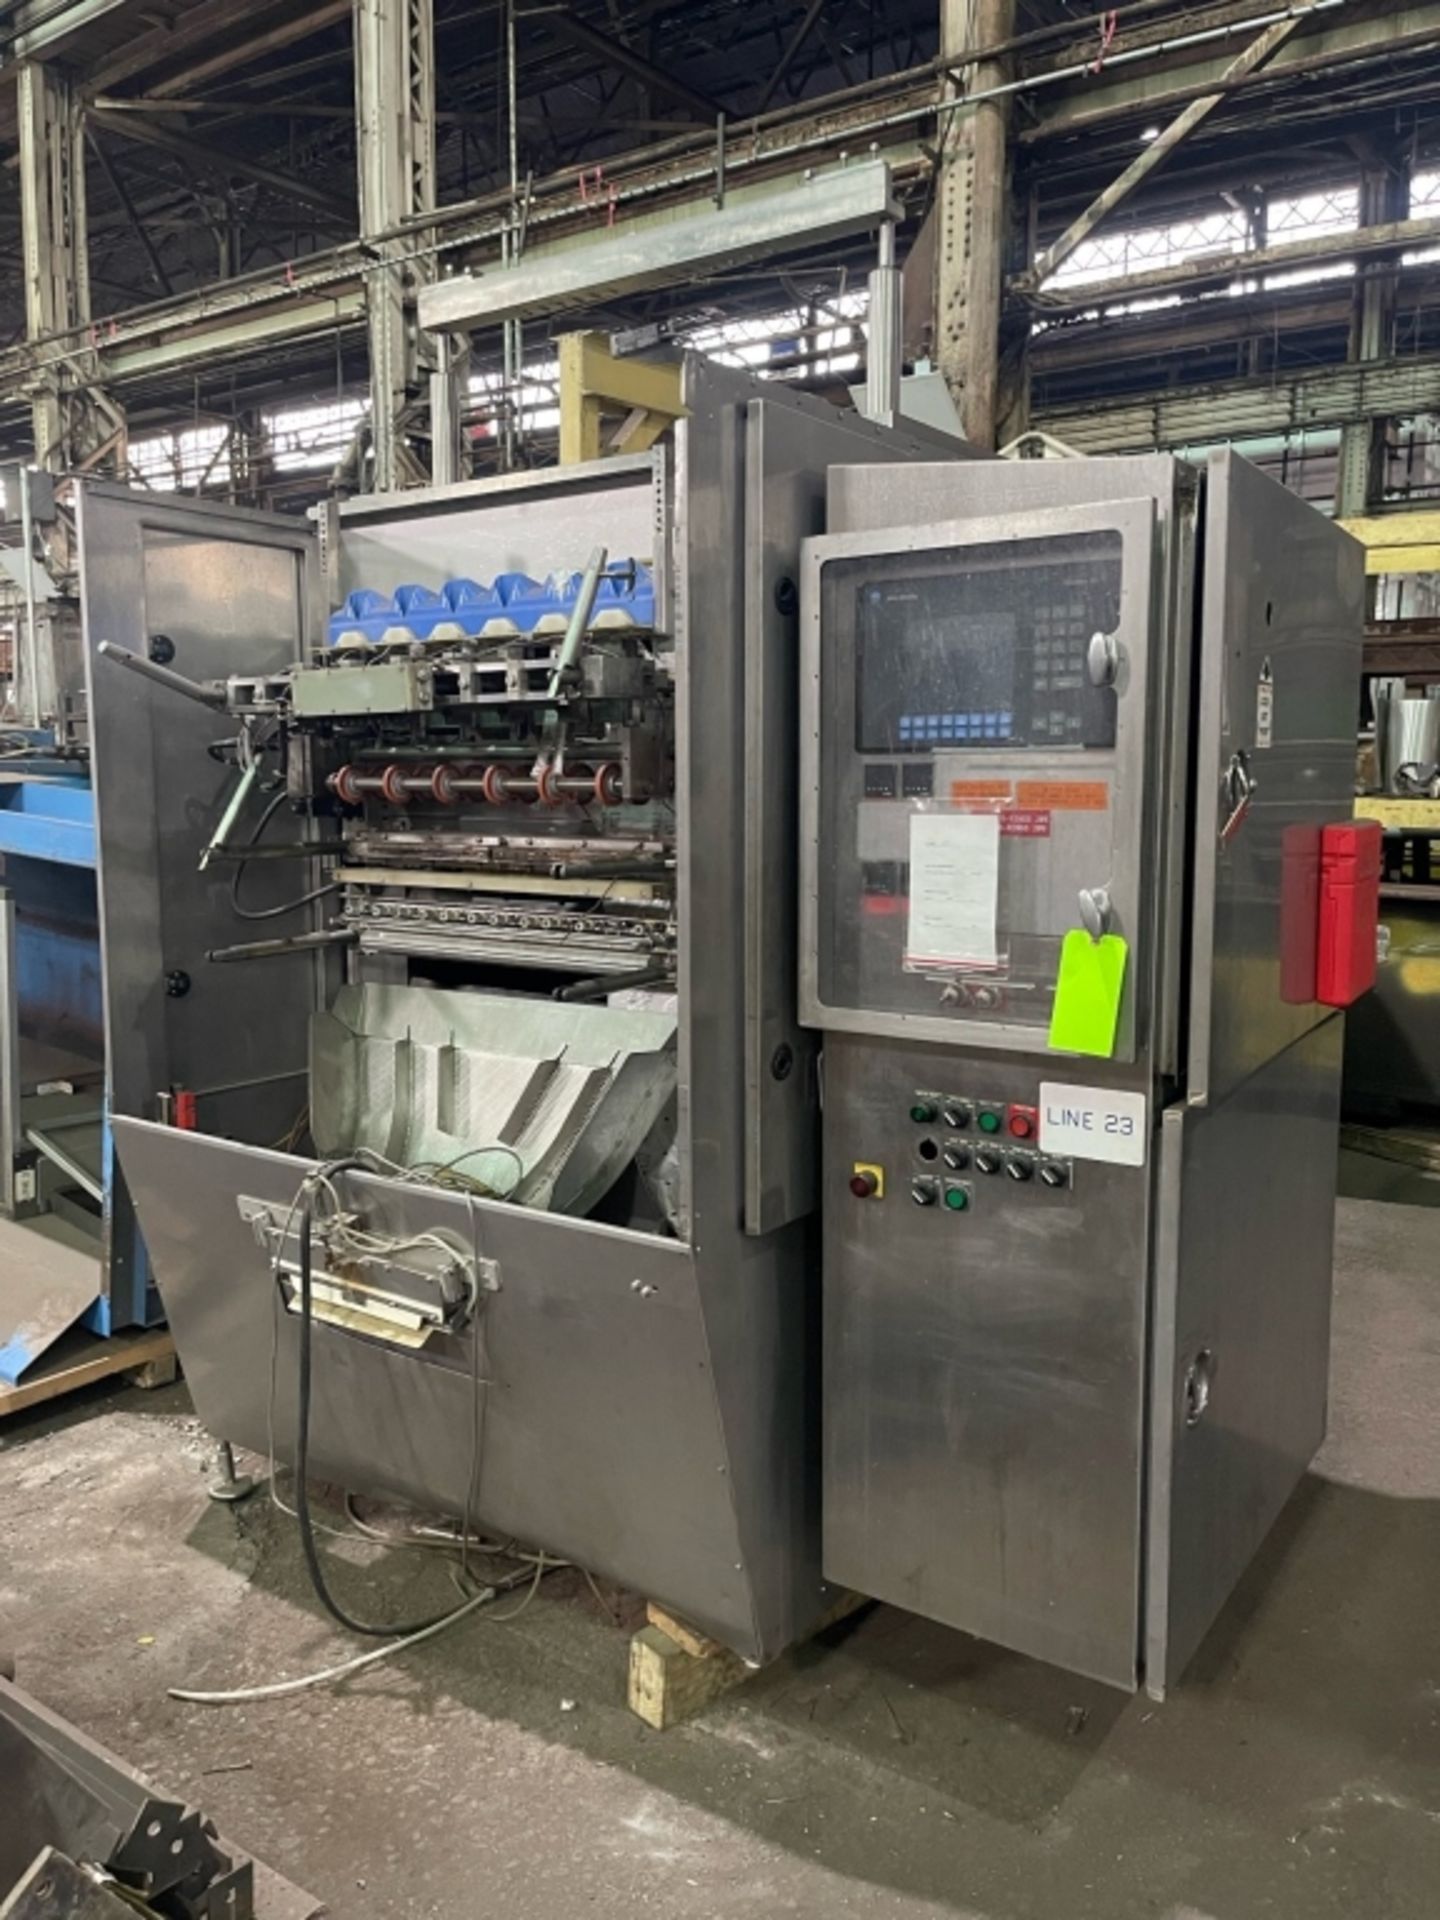 Winpack Vertical Form/Fill/Seal Pouch PackagingMachine, Model LD 32, SN 32008, with Allen Bradley